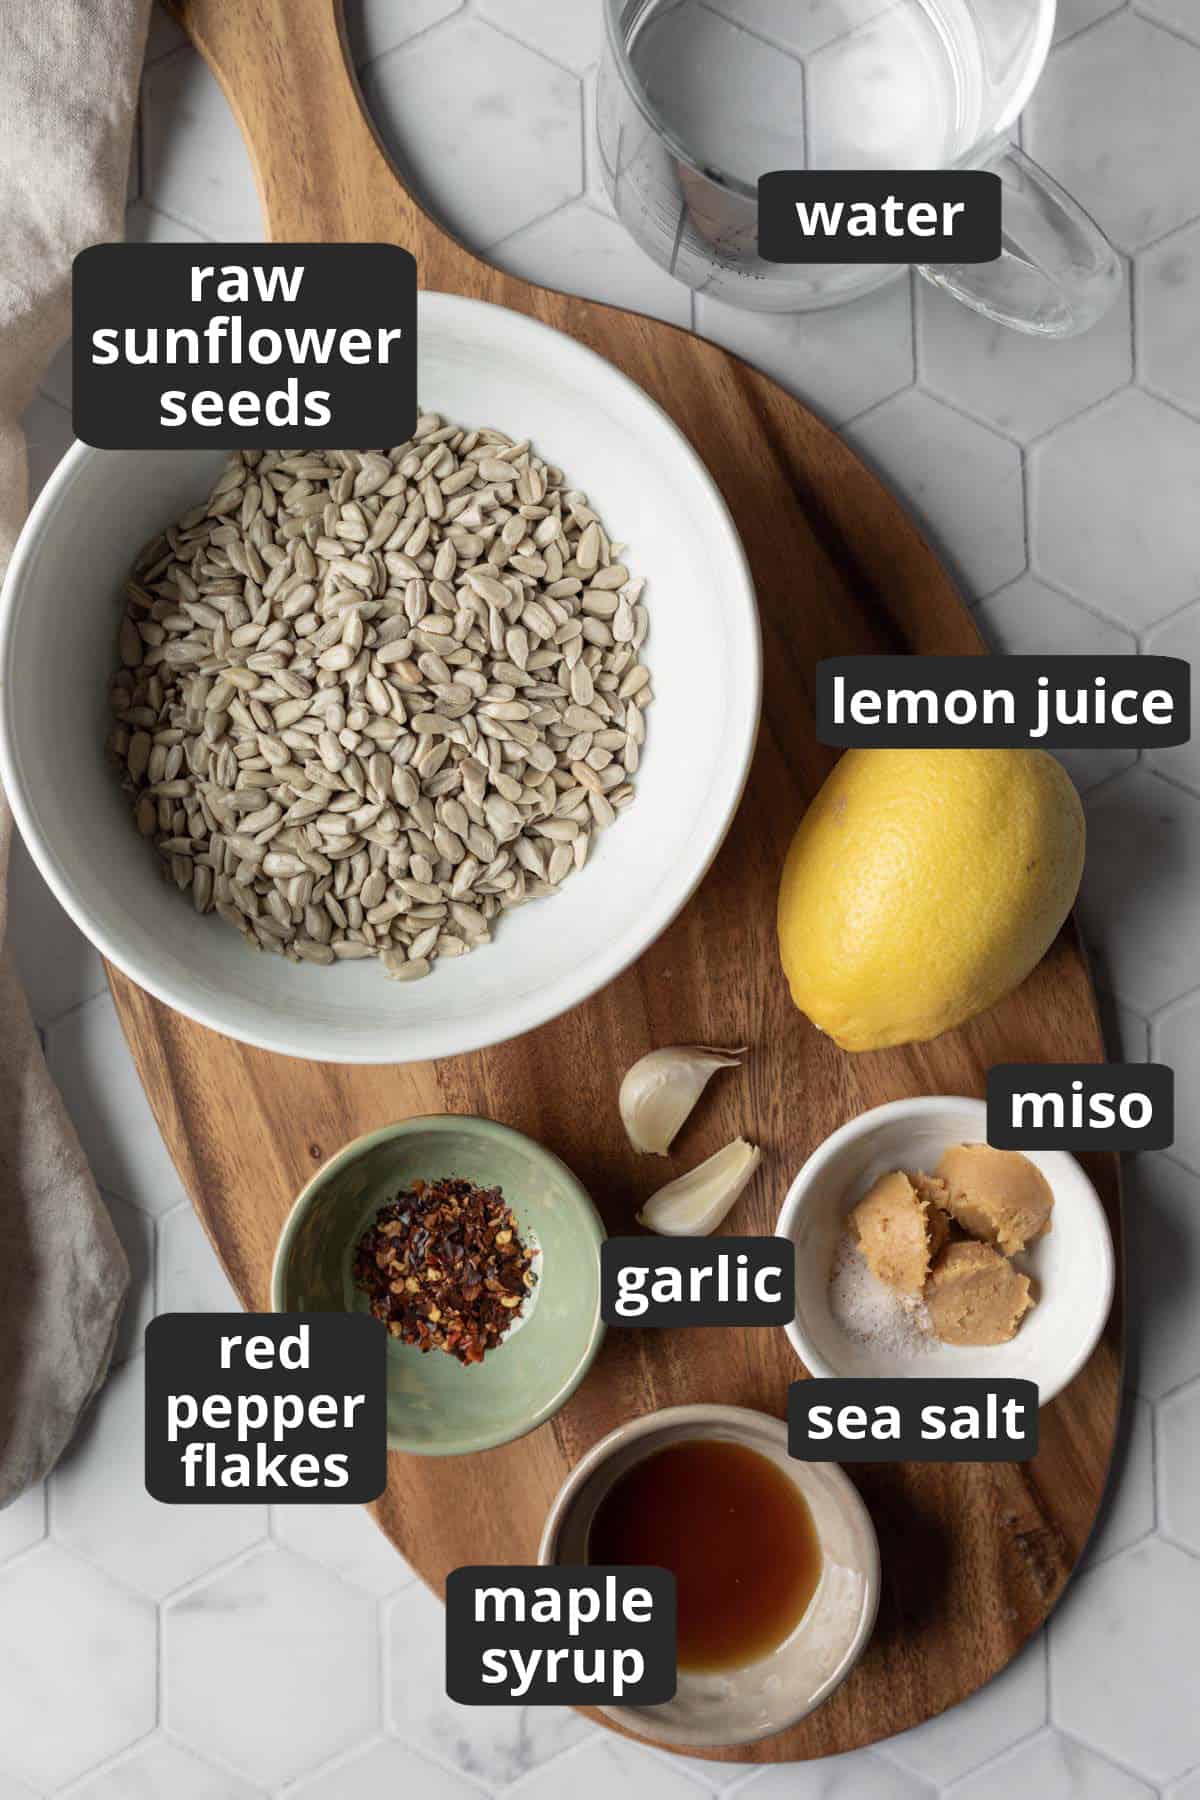 labeled photo of the ingredients needed for this salad dressing recipe.